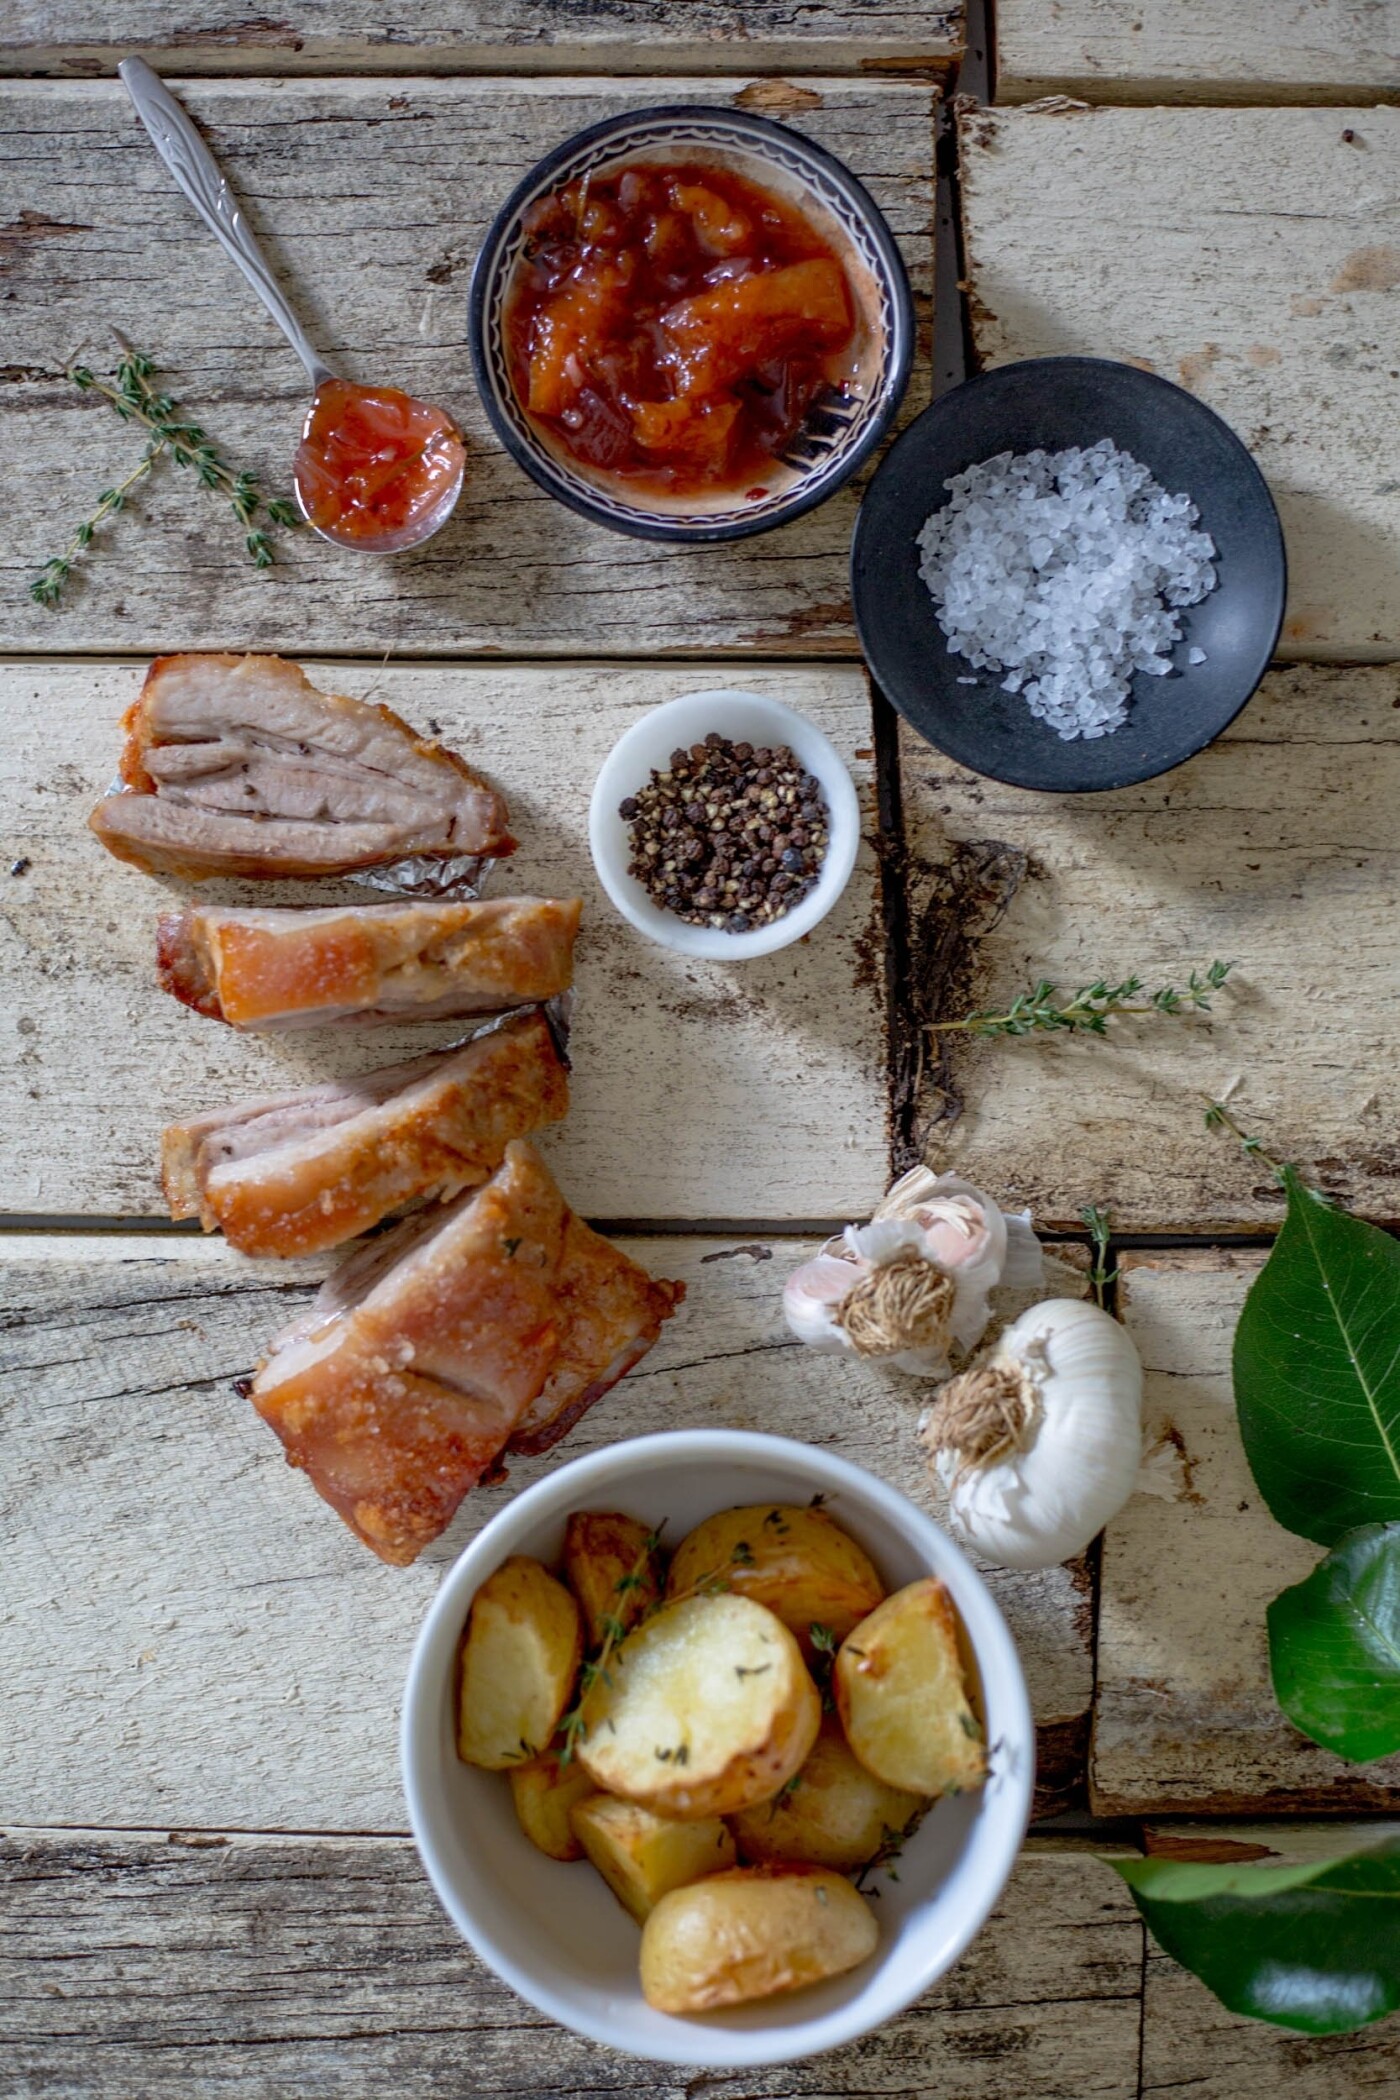 Pork belly with peach chutney will be the meal of the summer. Crispy pork belly, slowly roasted and rubbed with sea salt ensures the crispy crackling that we all love. Having a peach chutney helps break up the saltiness and fat then paired with potatoes makes the perfect roast. Easy to create and even easier to eat!